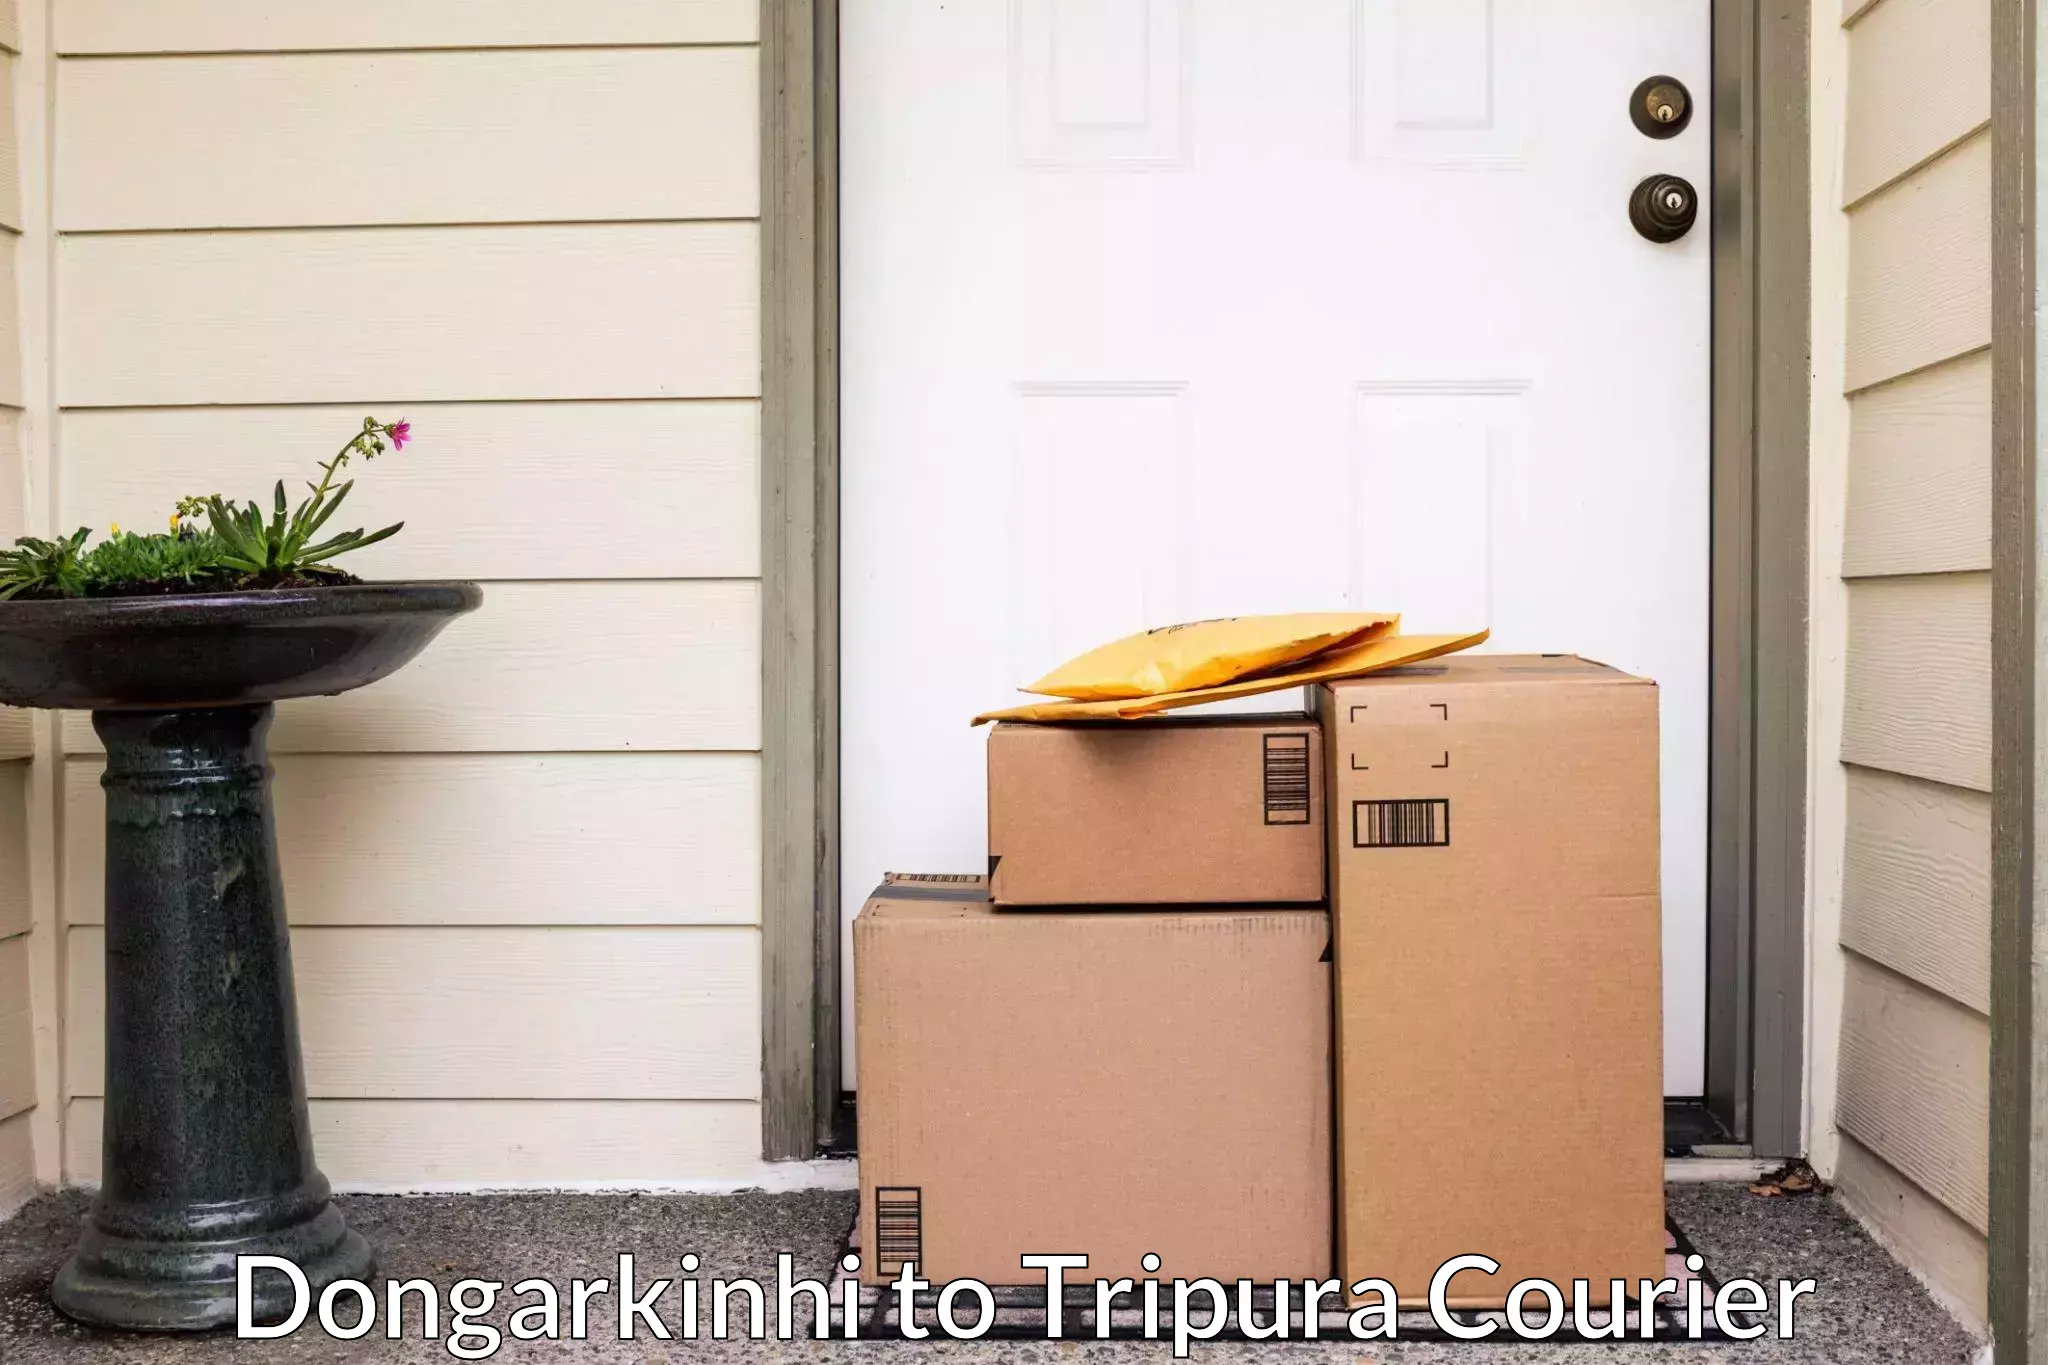 Efficient relocation services in Dongarkinhi to Tripura